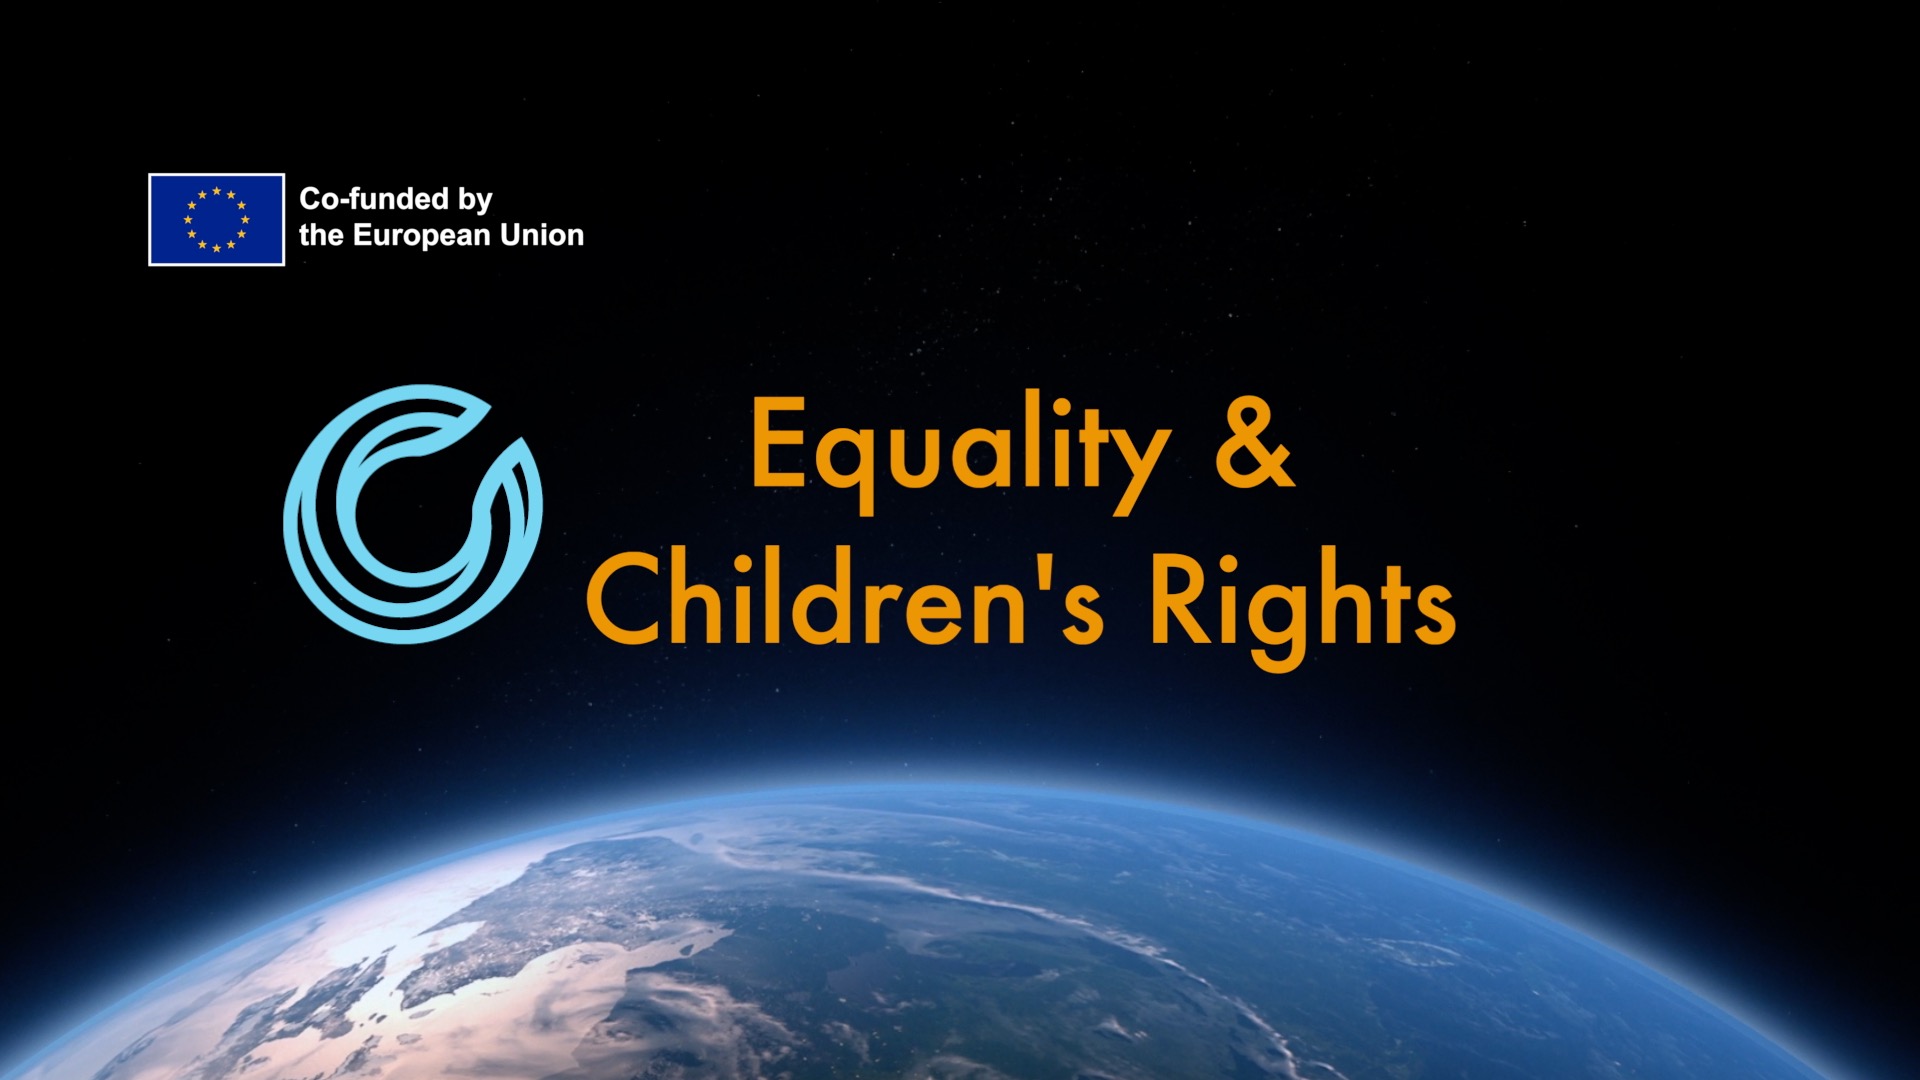 Equality & Children’s Rights